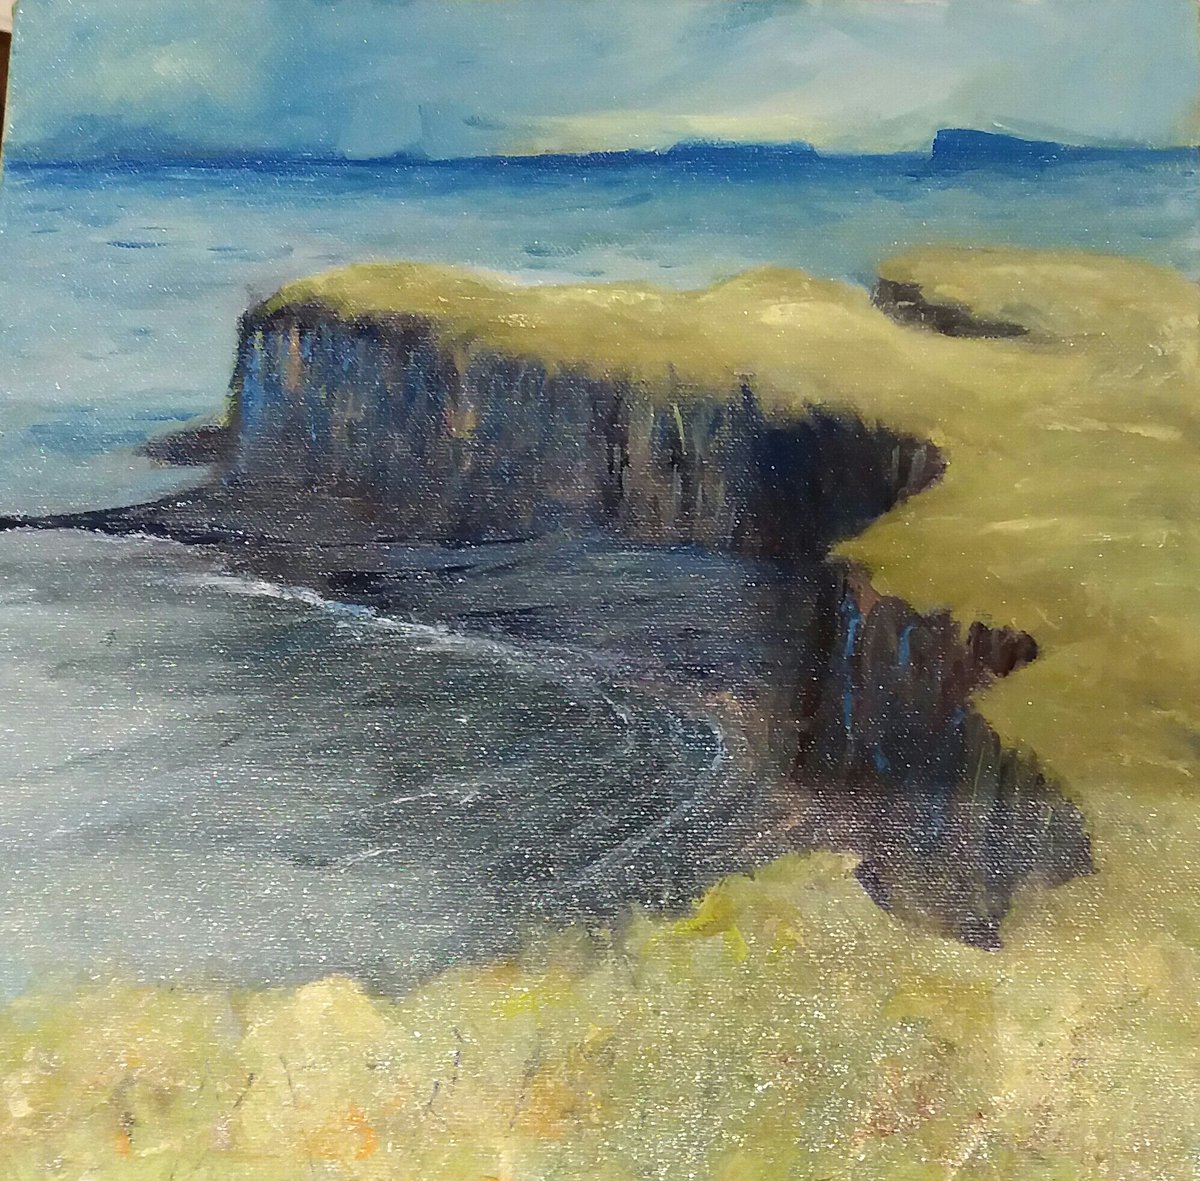 Today's effort for #LandFebruary oil painting of Staffa - view north from the high point. (Round the corner from the cave!) #oilpainting #scottishisland